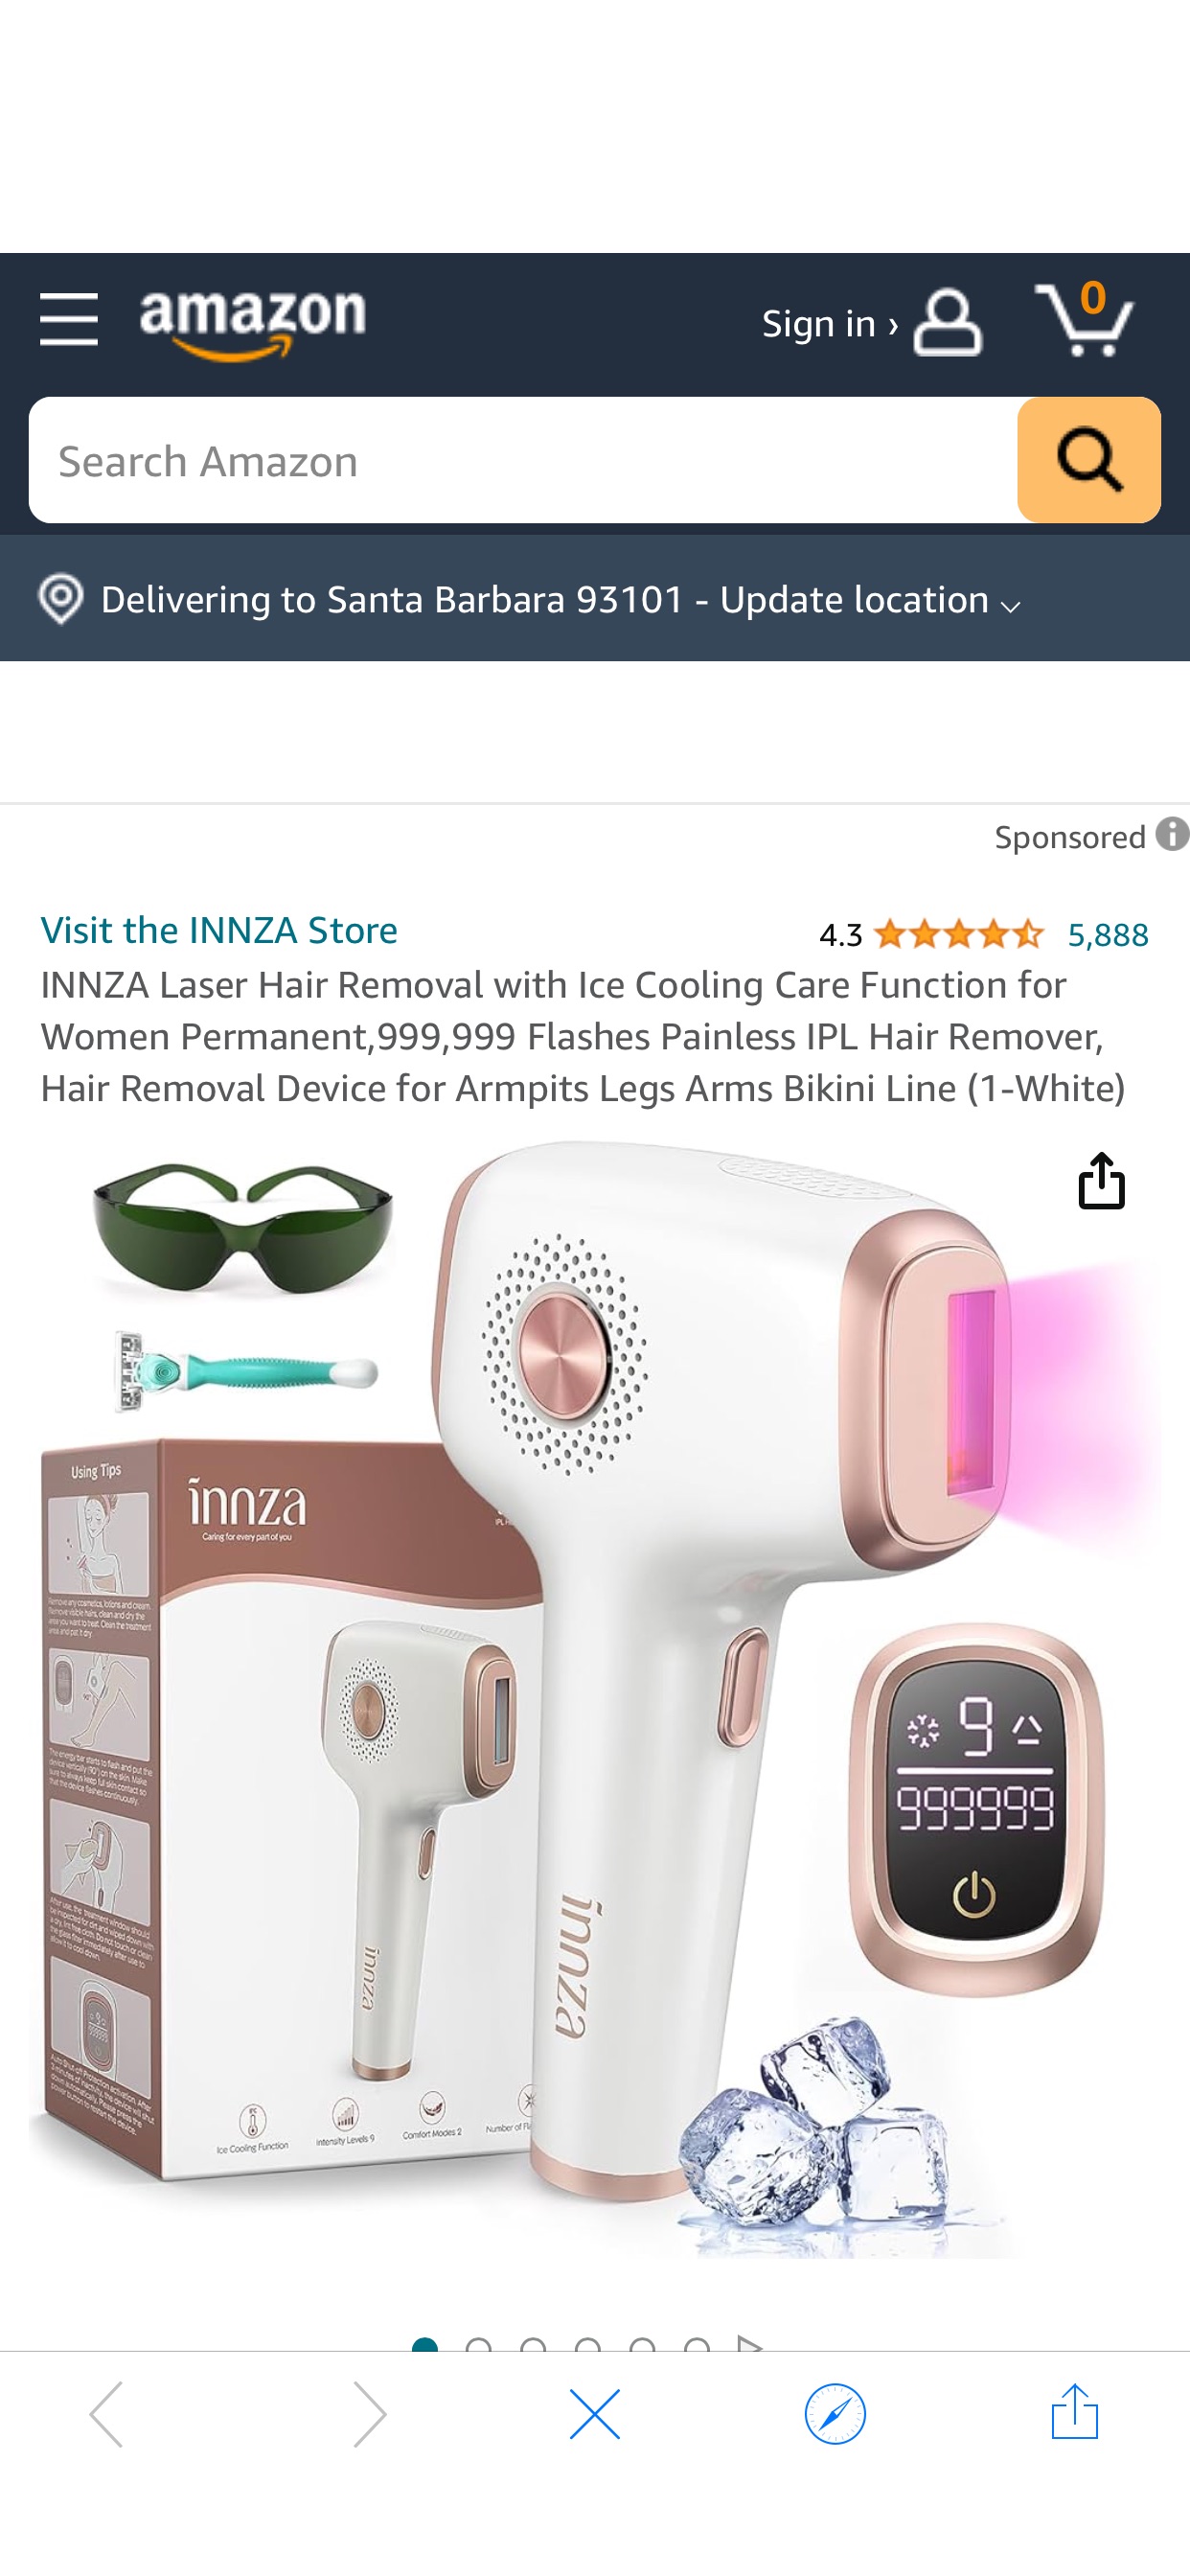 Amazon.com: INNZA Laser Hair Removal with Ice Cooling Care Function for Women Permanent,999,999 Flashes Painless IPL Hair Remover, Hair Removal Device for Armpits Legs Arms Bikini Line (1-White) : Bea